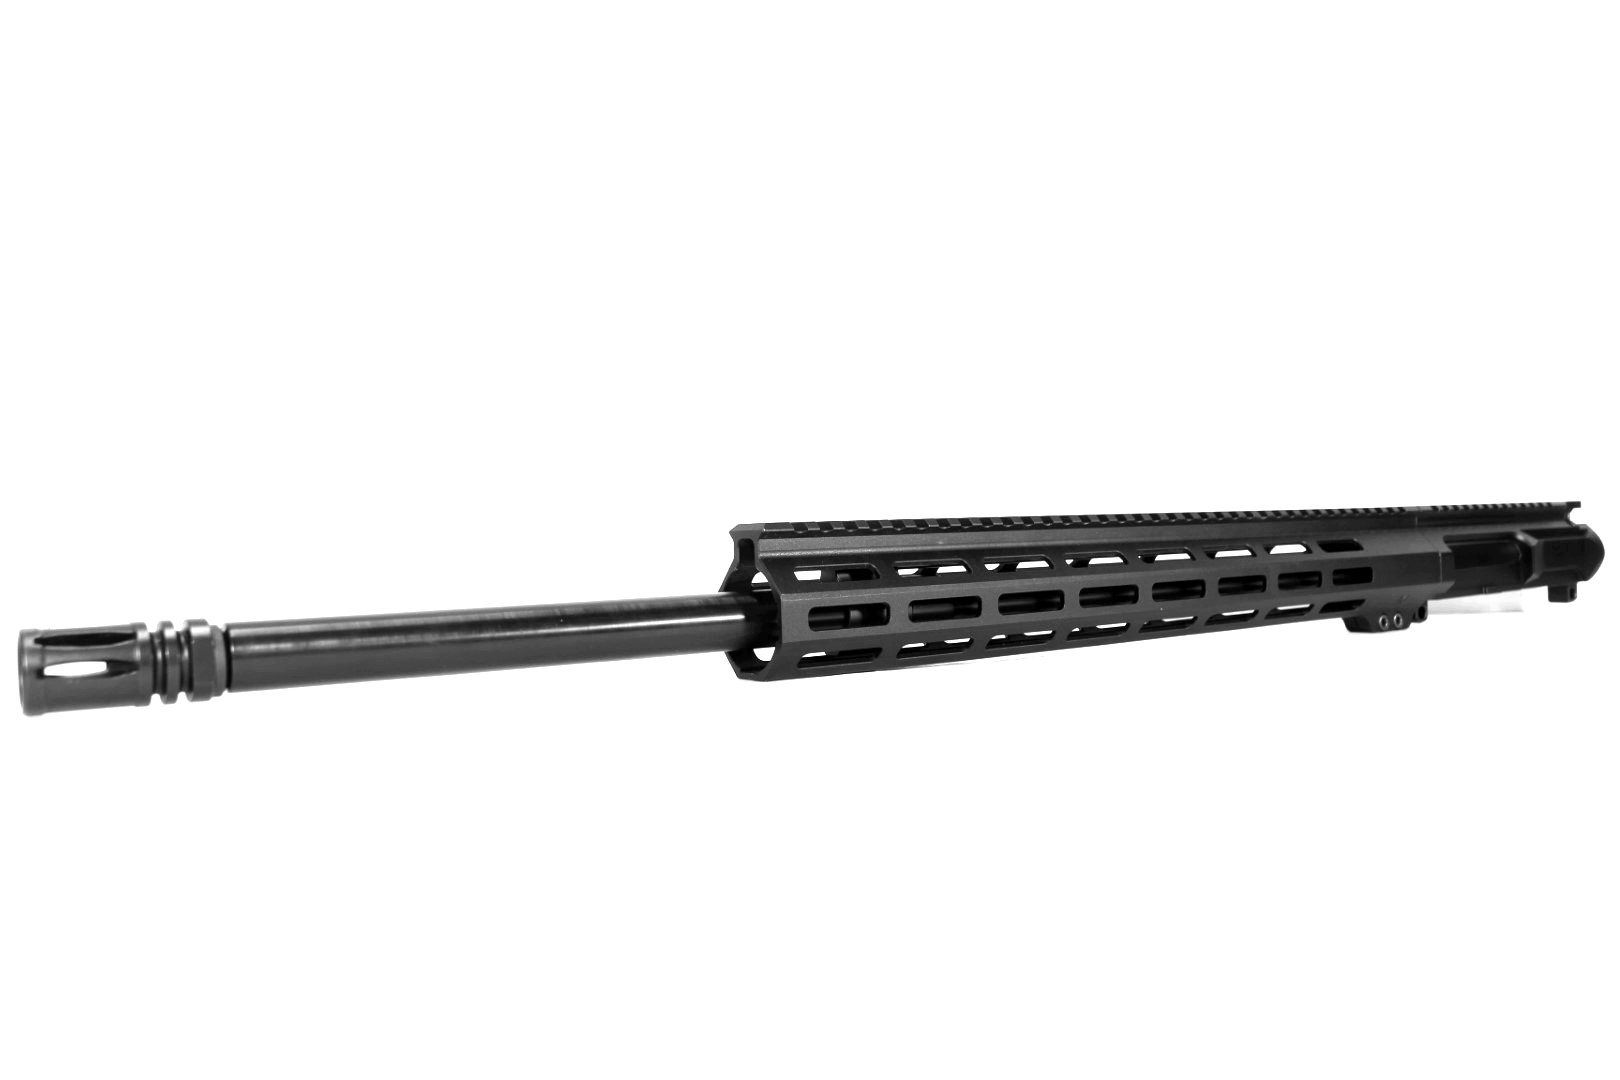 22 inch AR-15 Non Reciprocating SIde Charging 224 Valkyrie Rifle M-LOK Melonite Upper 